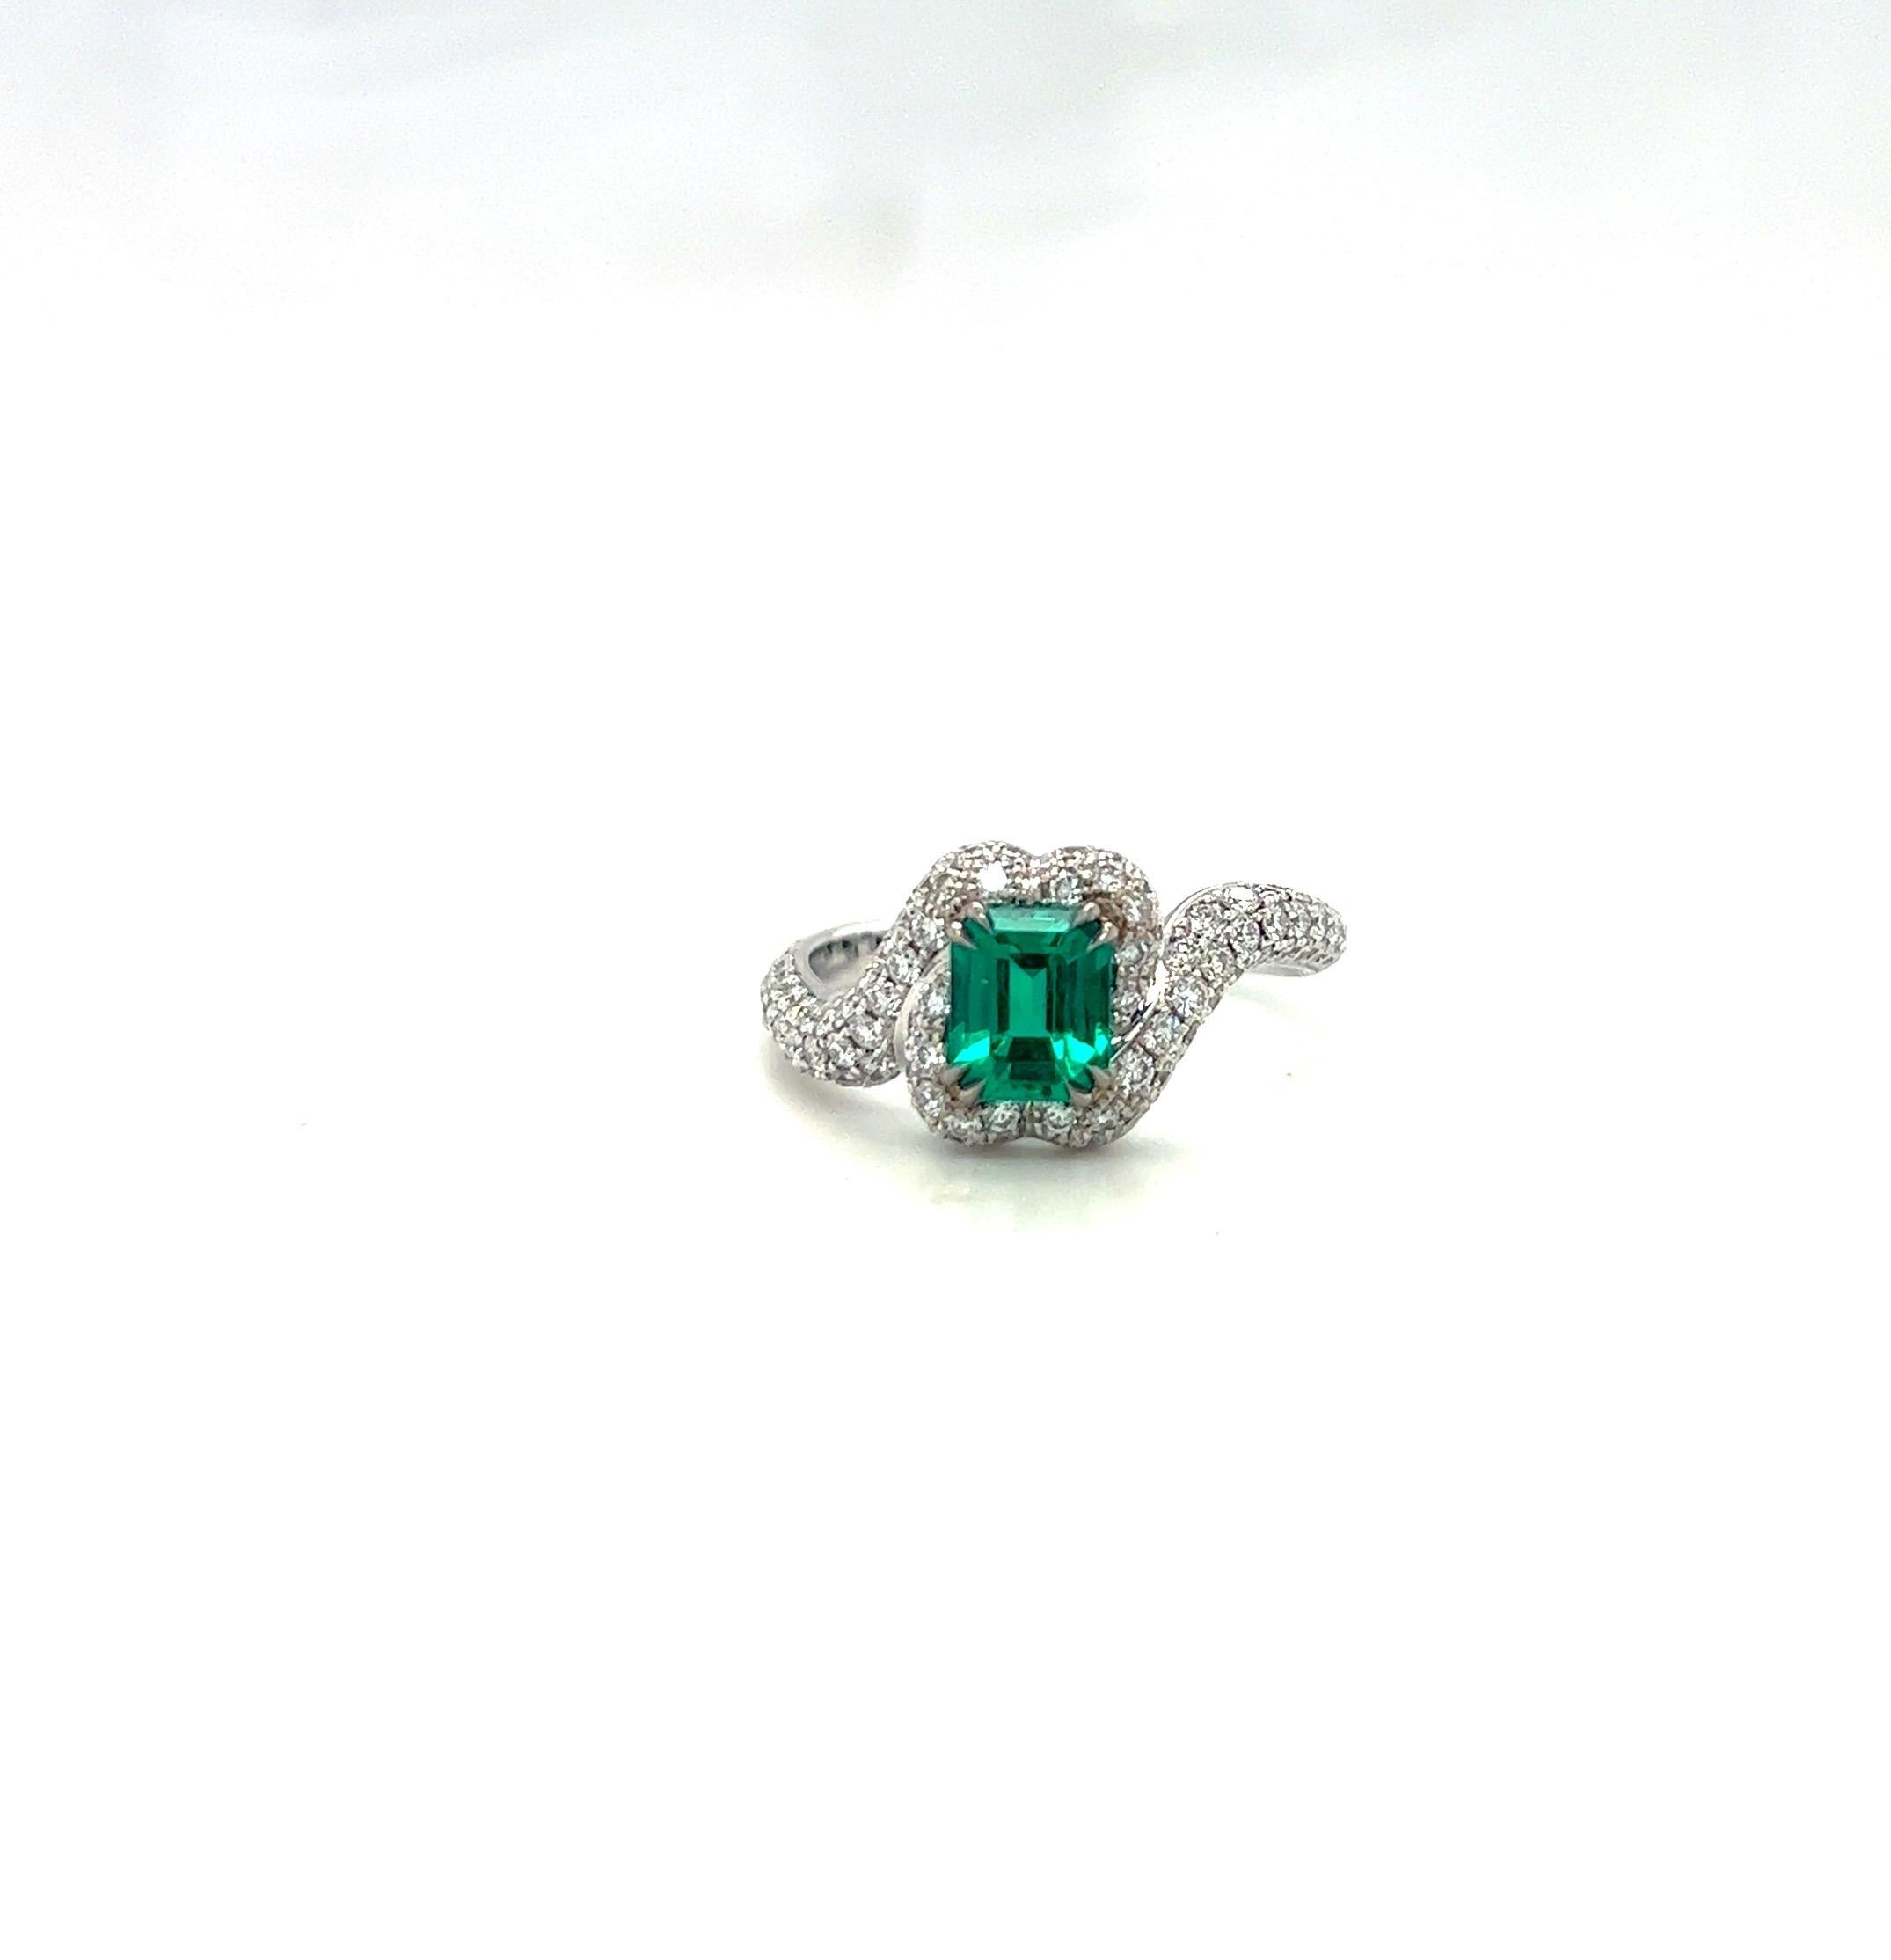 This 18 karat white gold ring centers a 1.00 carat emerald cut Colombian Emerald. The vibrant Emerald is beautifully set in a pave diamond organically shaped setting of 1.01 carats.
The ring size is 8.5, but can be sized.